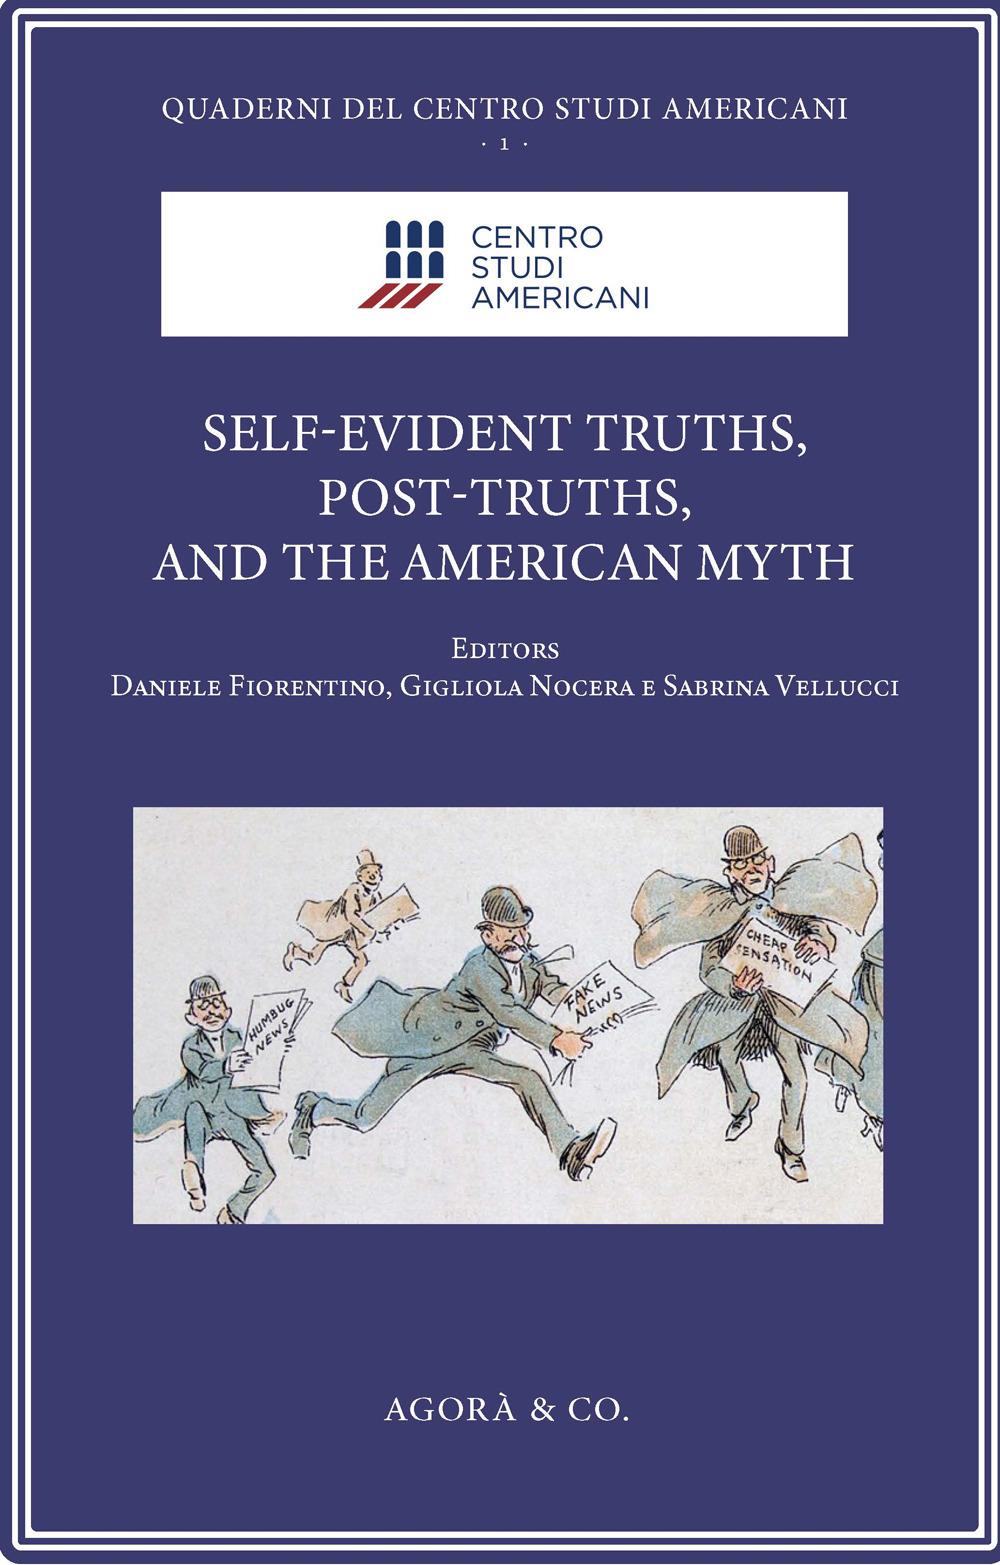 Self-evident truths, post-truths, and the American myth